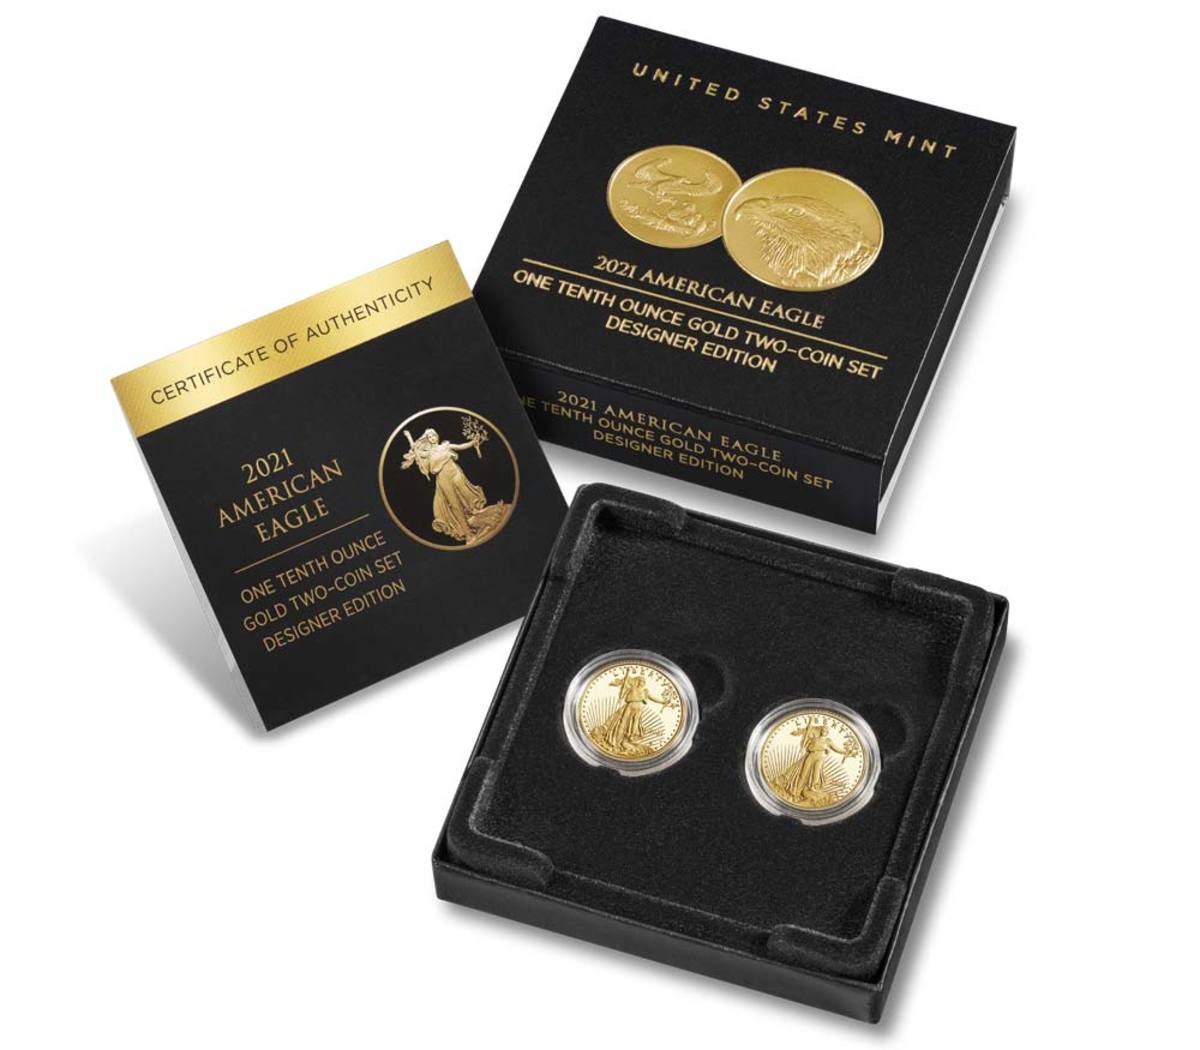 Tenth-ounce gold American Eagle two-coin set featuring the old and new designs (Image courtesy United States Mint.)